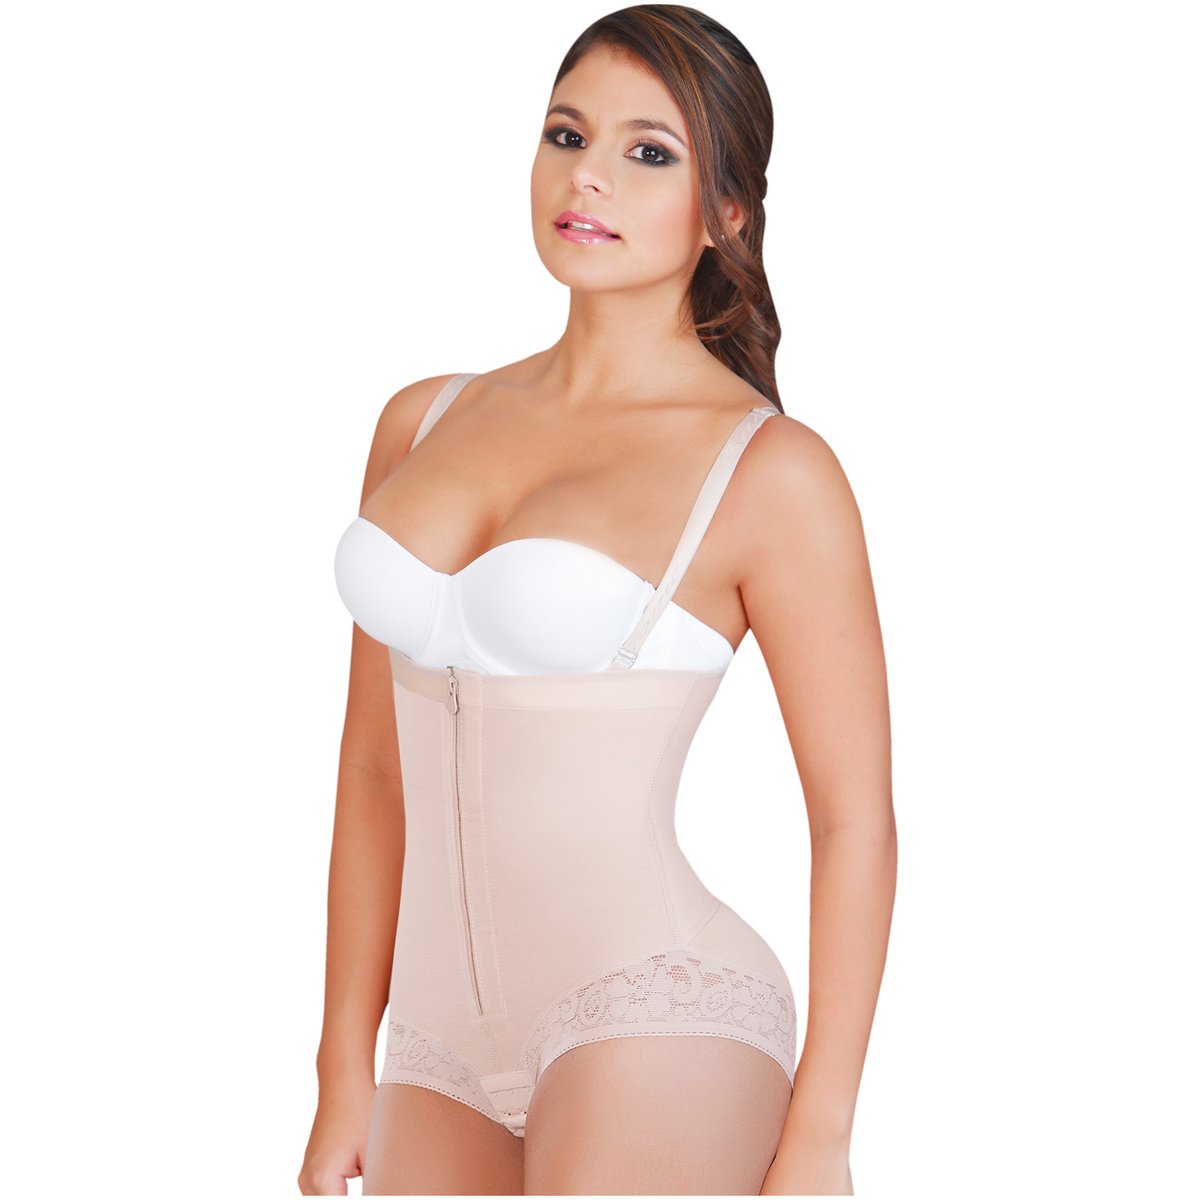 Strapless body shaper with lace